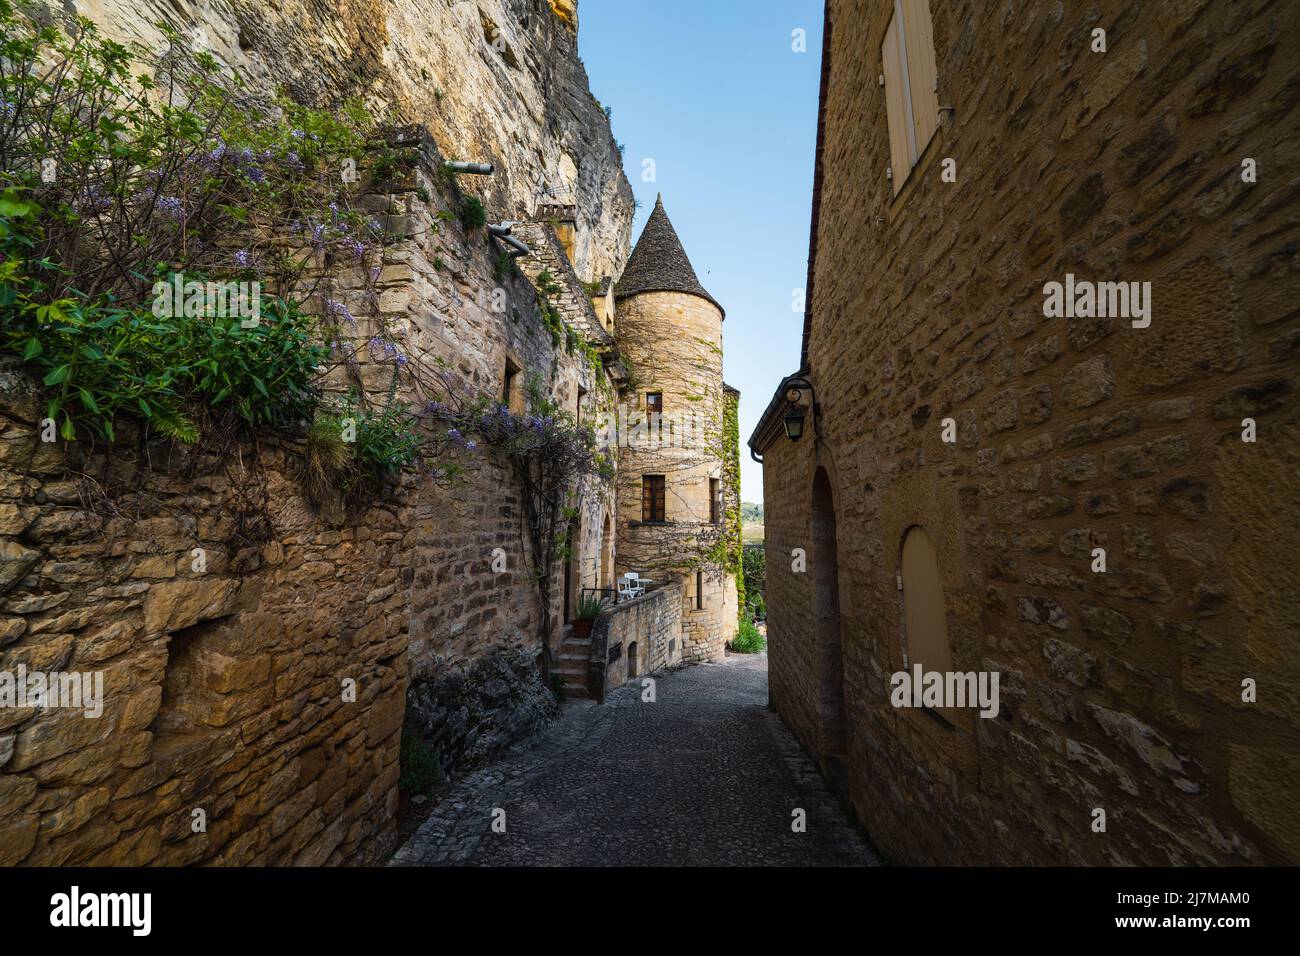 The streets of Fort de La Roque-Gageac in La Roque-Gageac near Verzac in a southwest France during the spring time Stock Photo